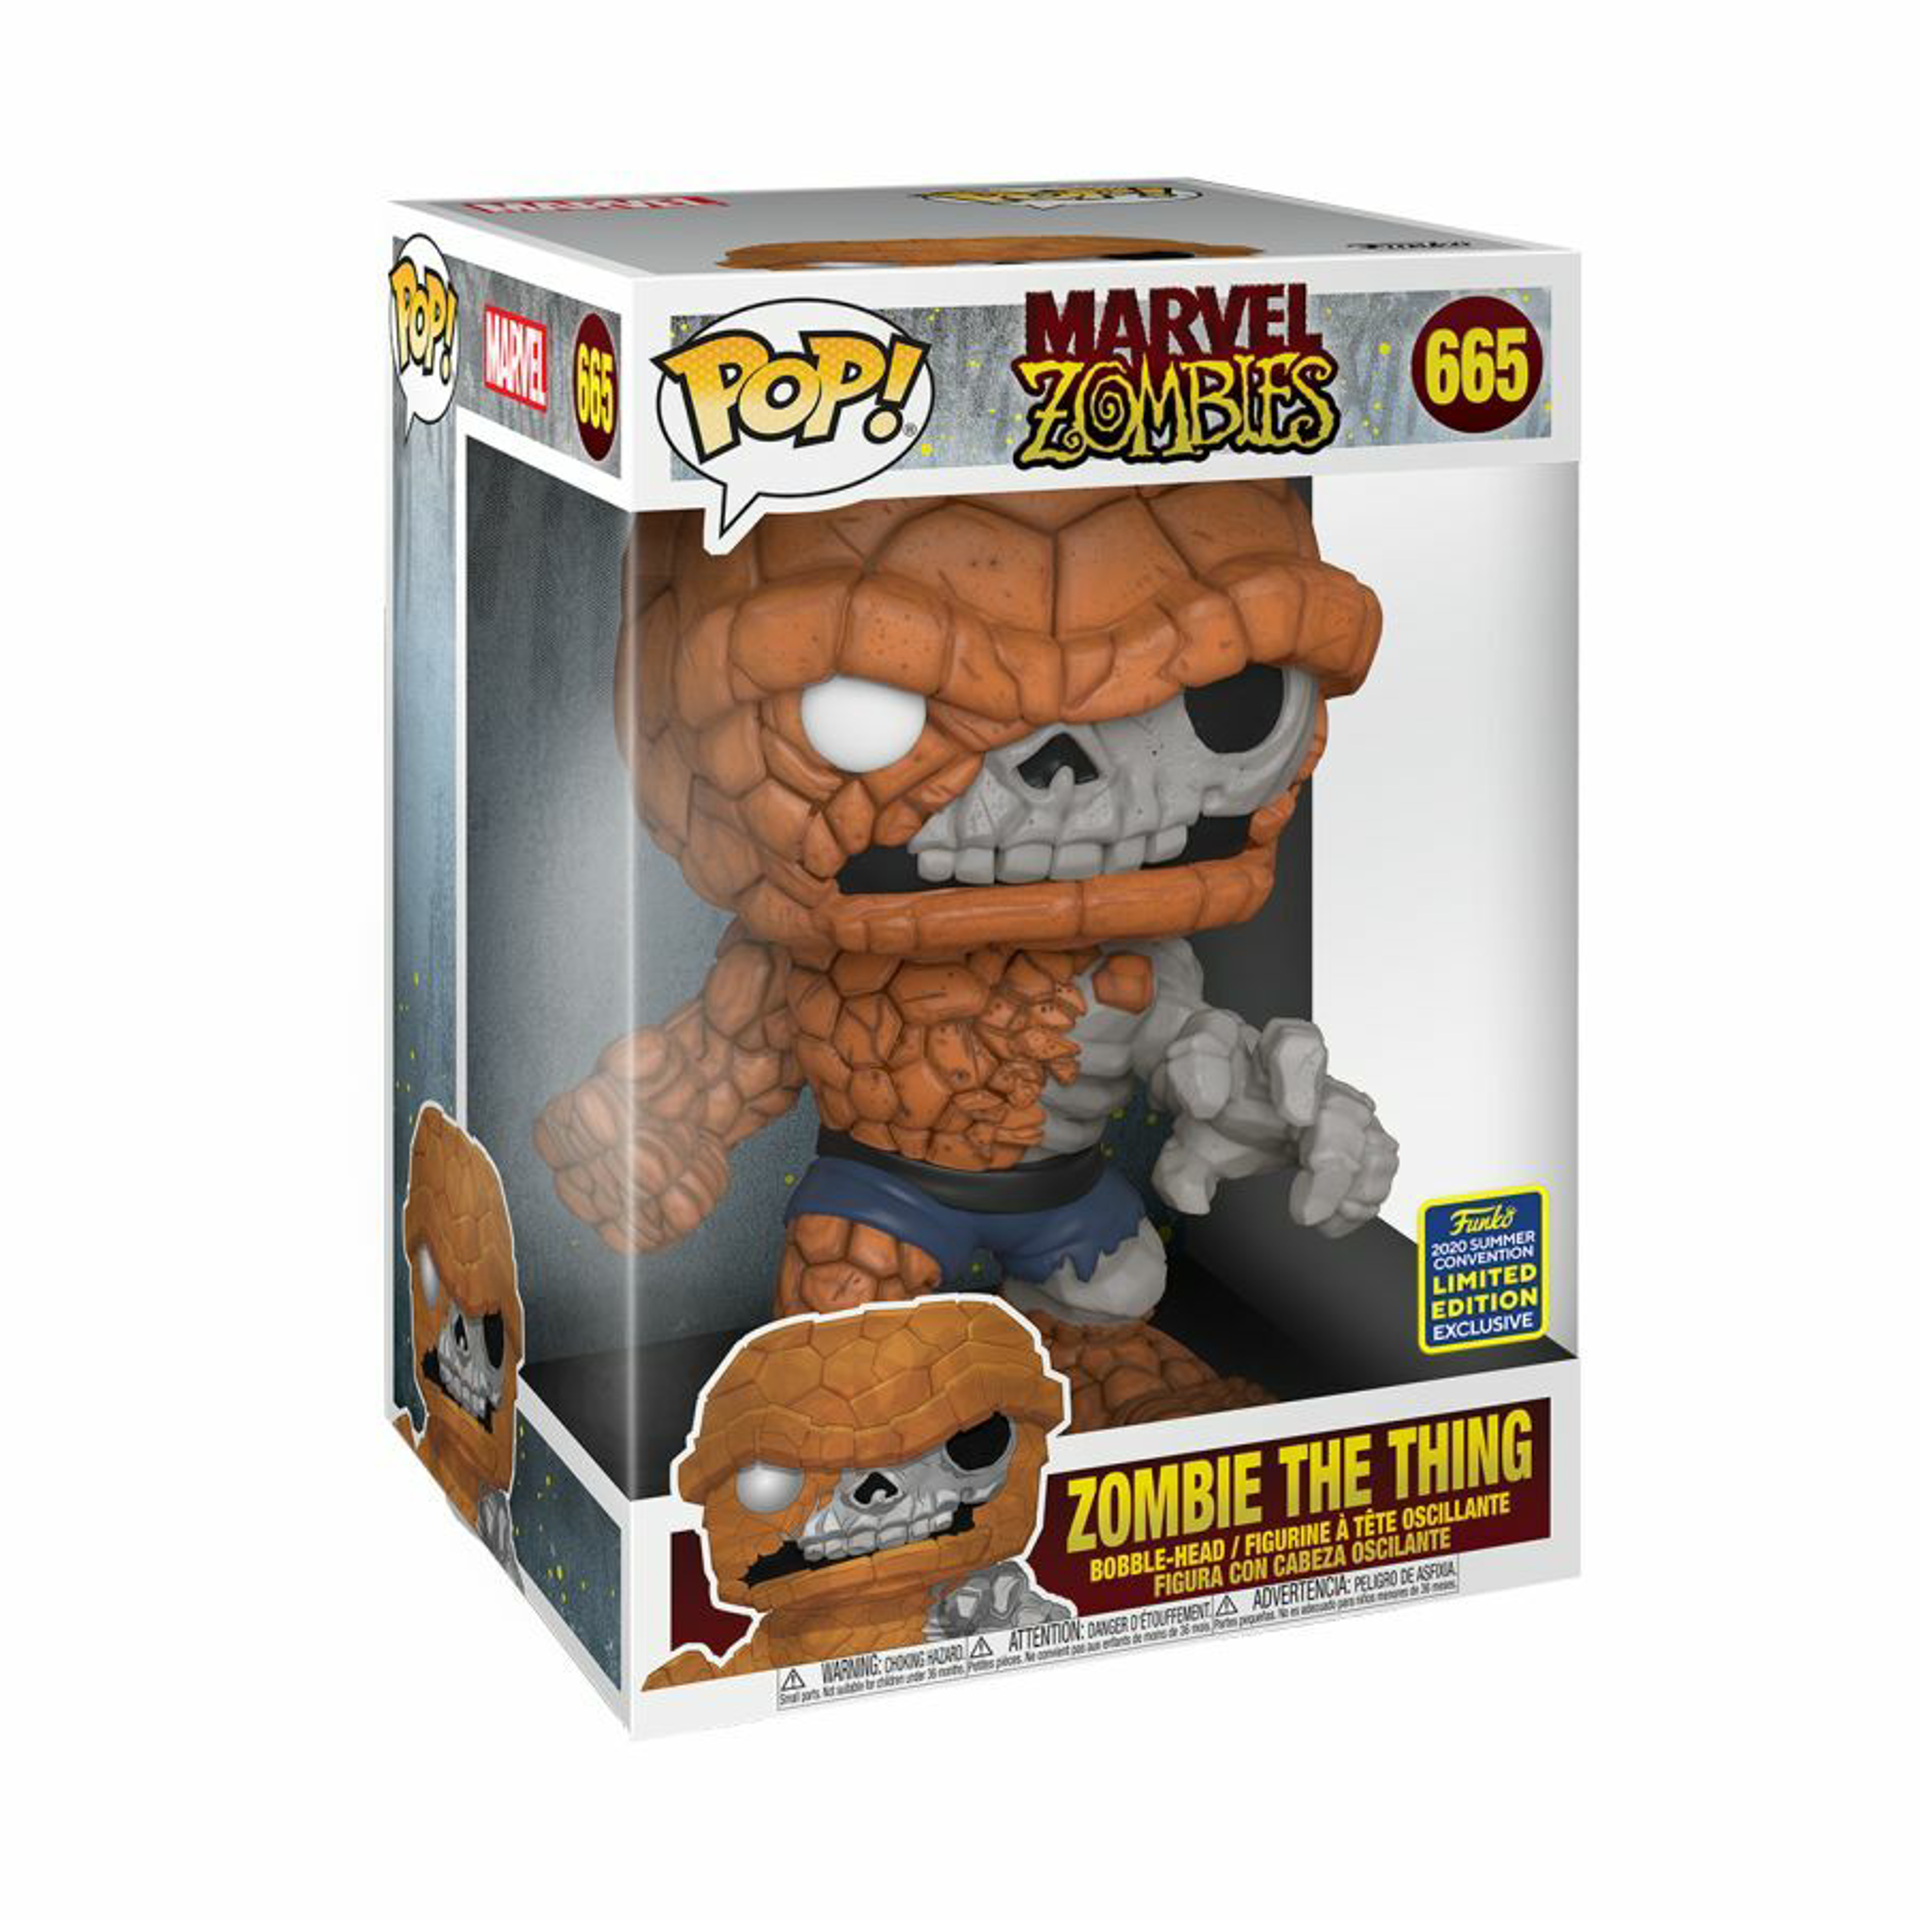 Funko Pop! Marvel Zombies: Zombie The Thing 10" Super Sized Pop! - US Exclusive